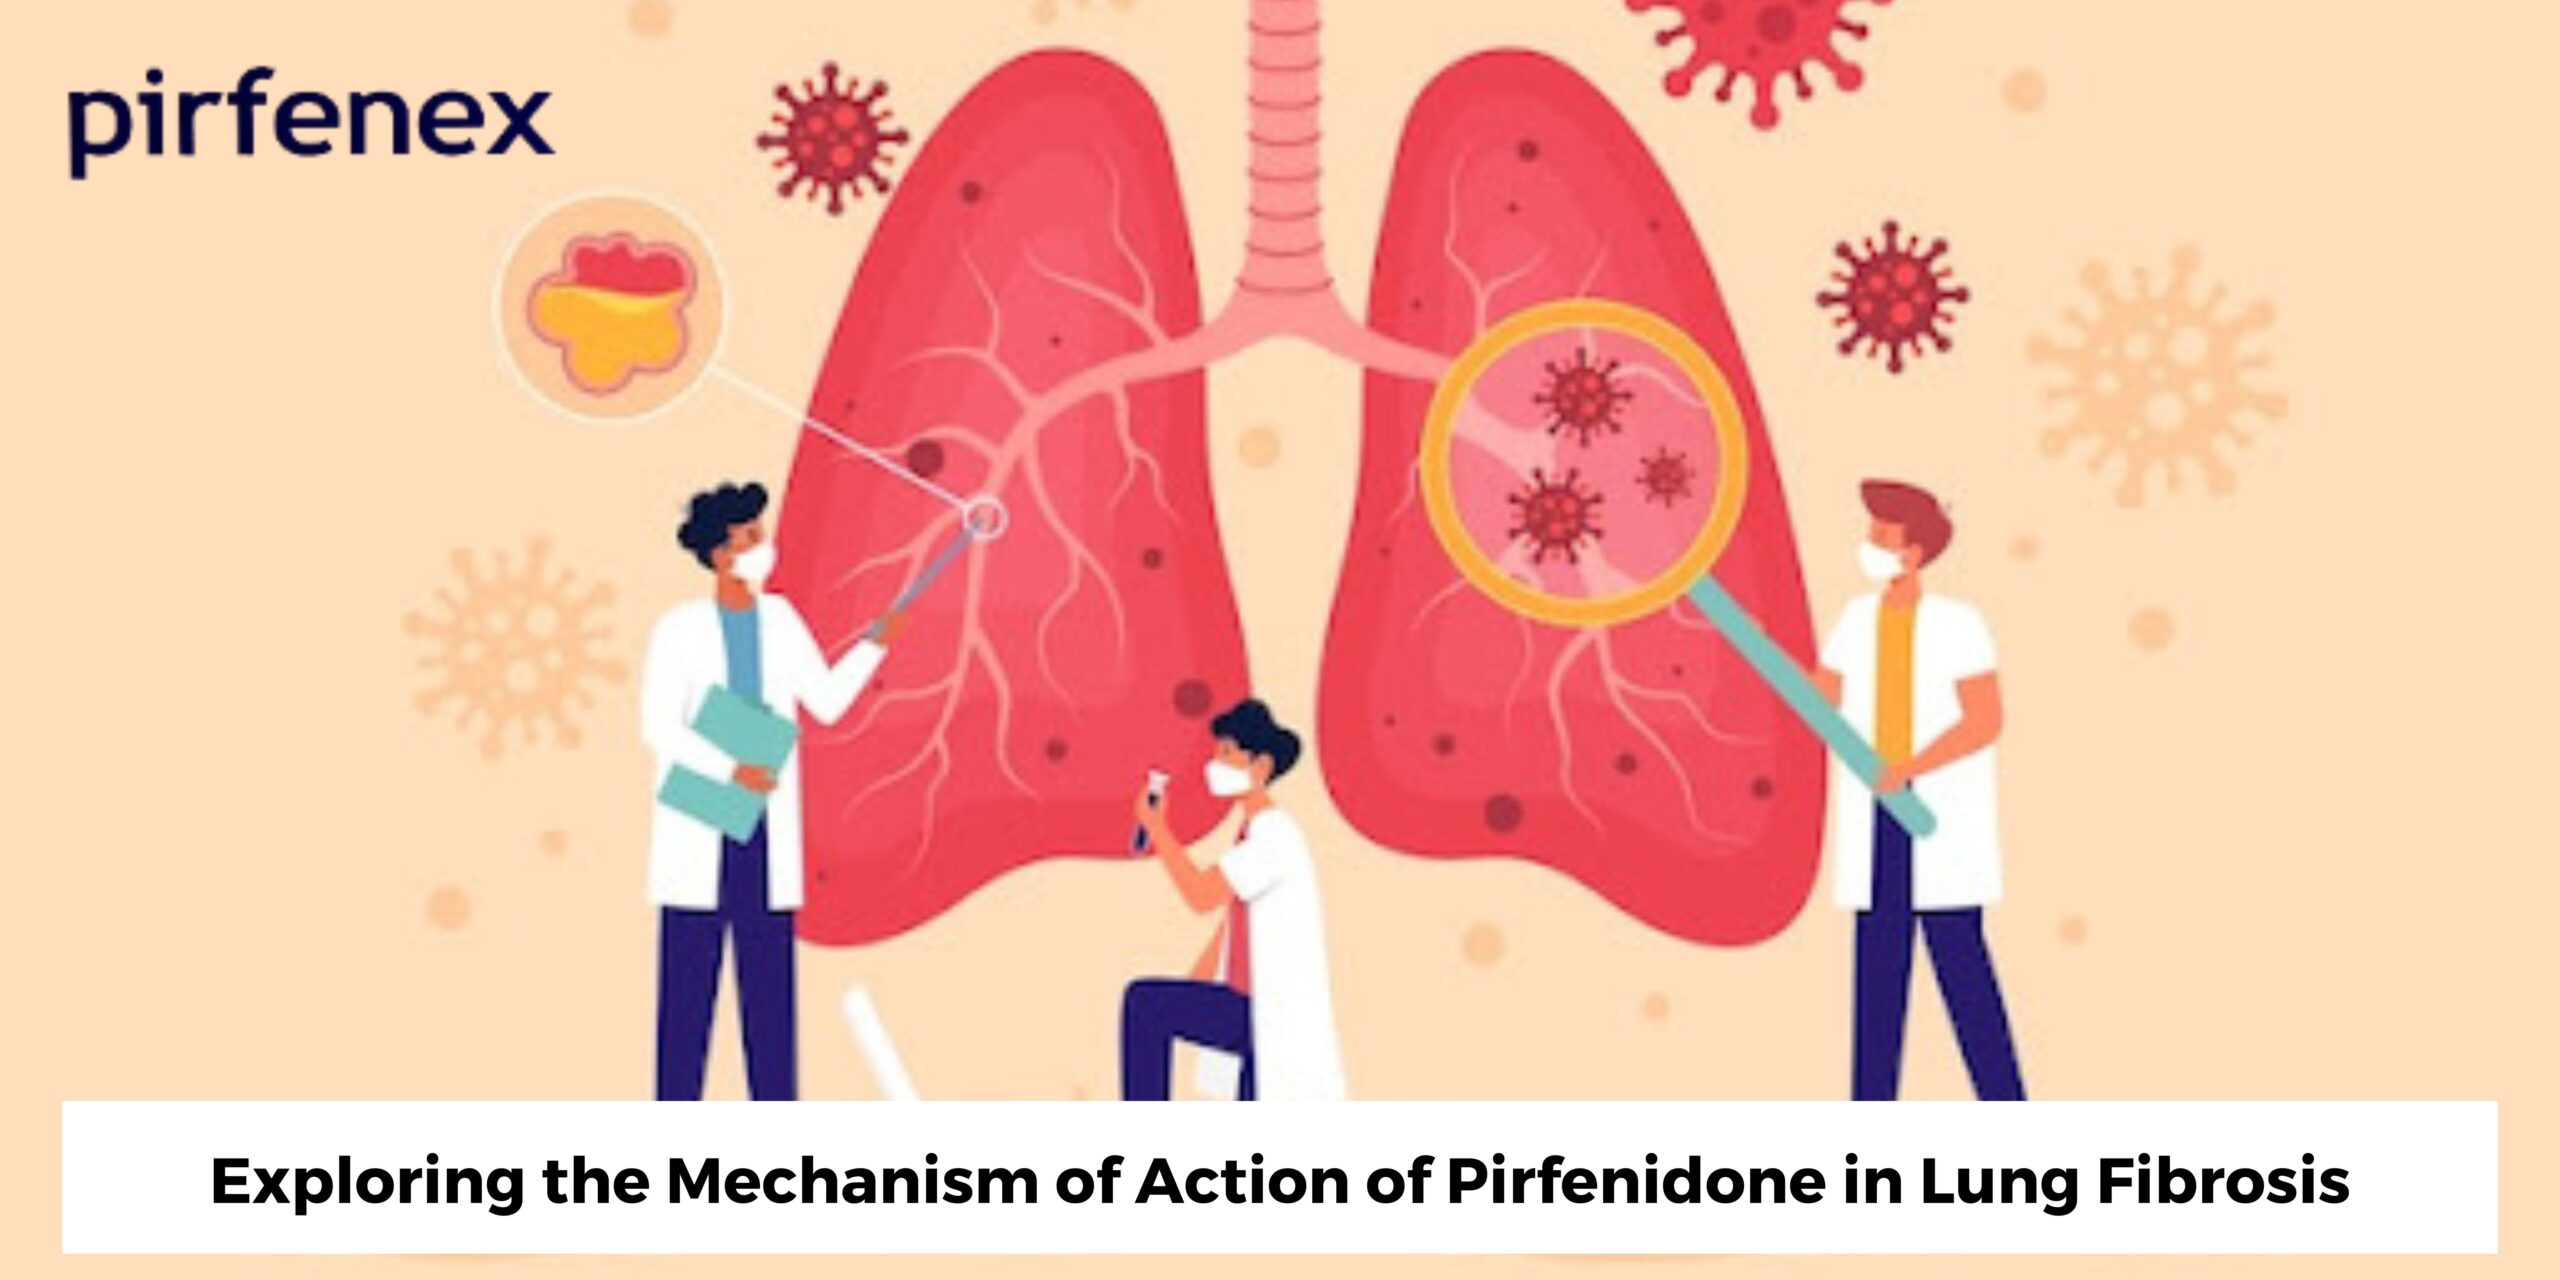 Exploring the Mechanism of Action of Pirfenidone in Lung Fibrosis